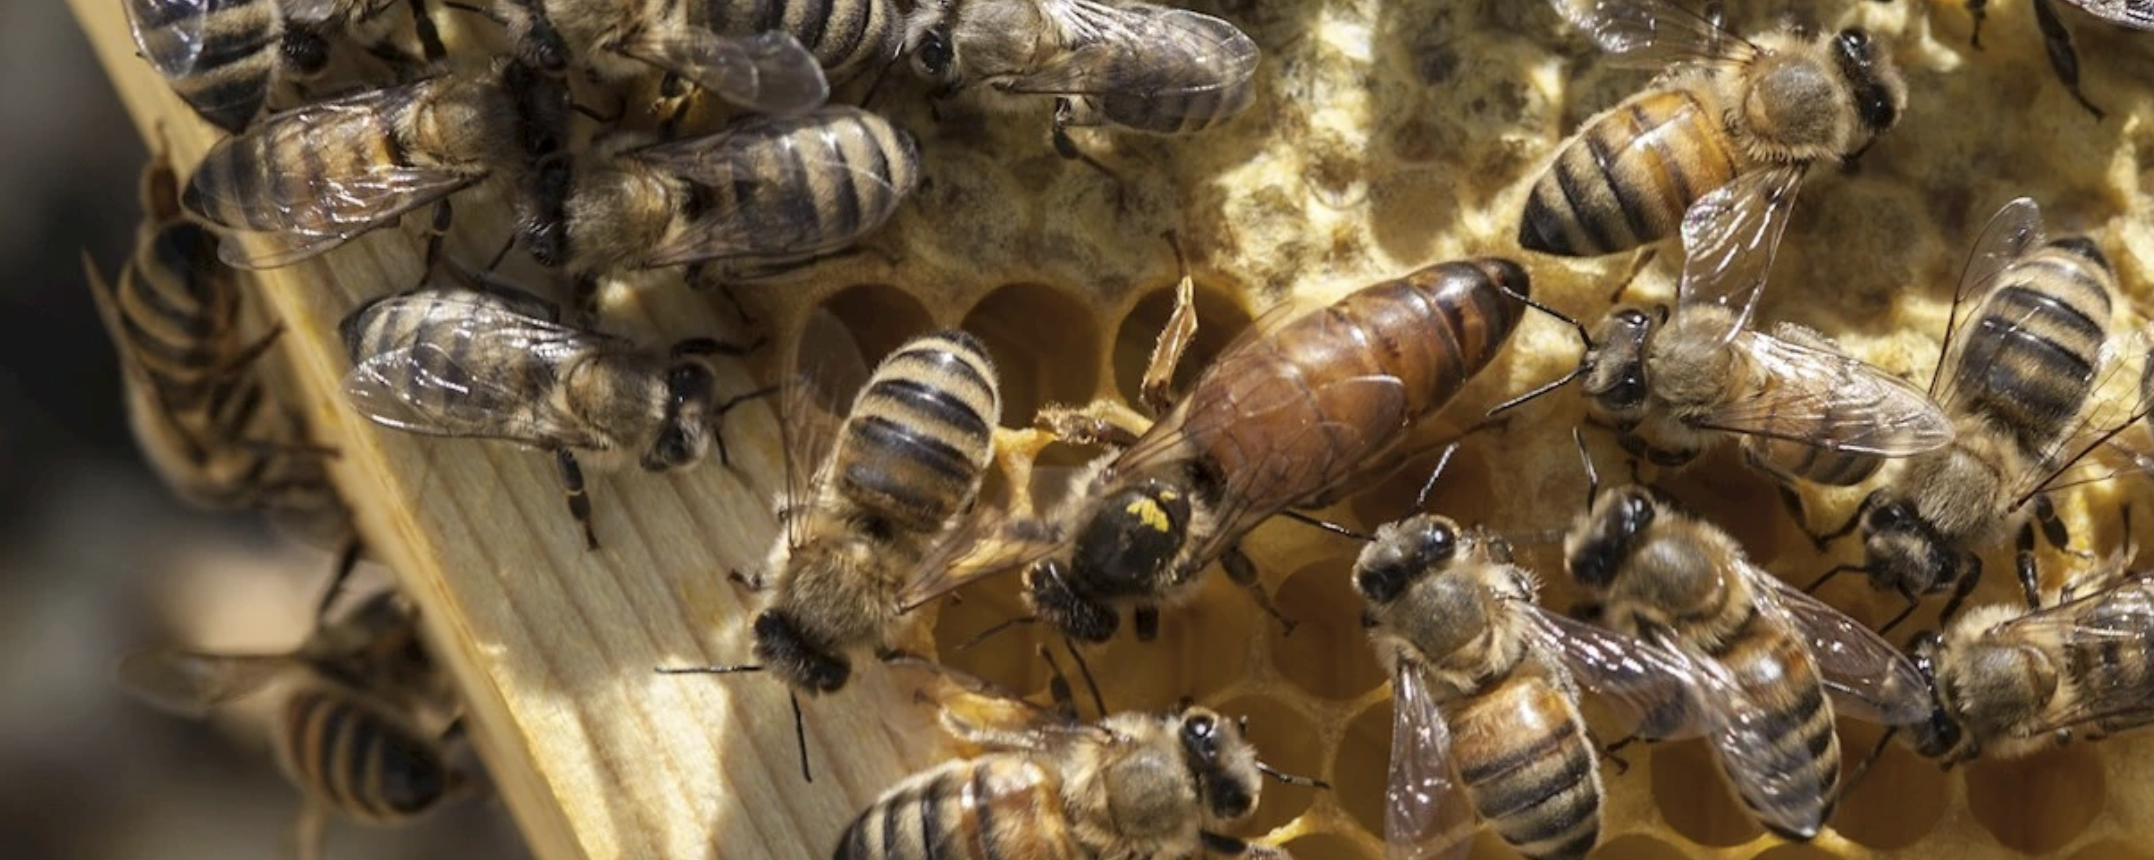 A close-up of honeybees in a hive